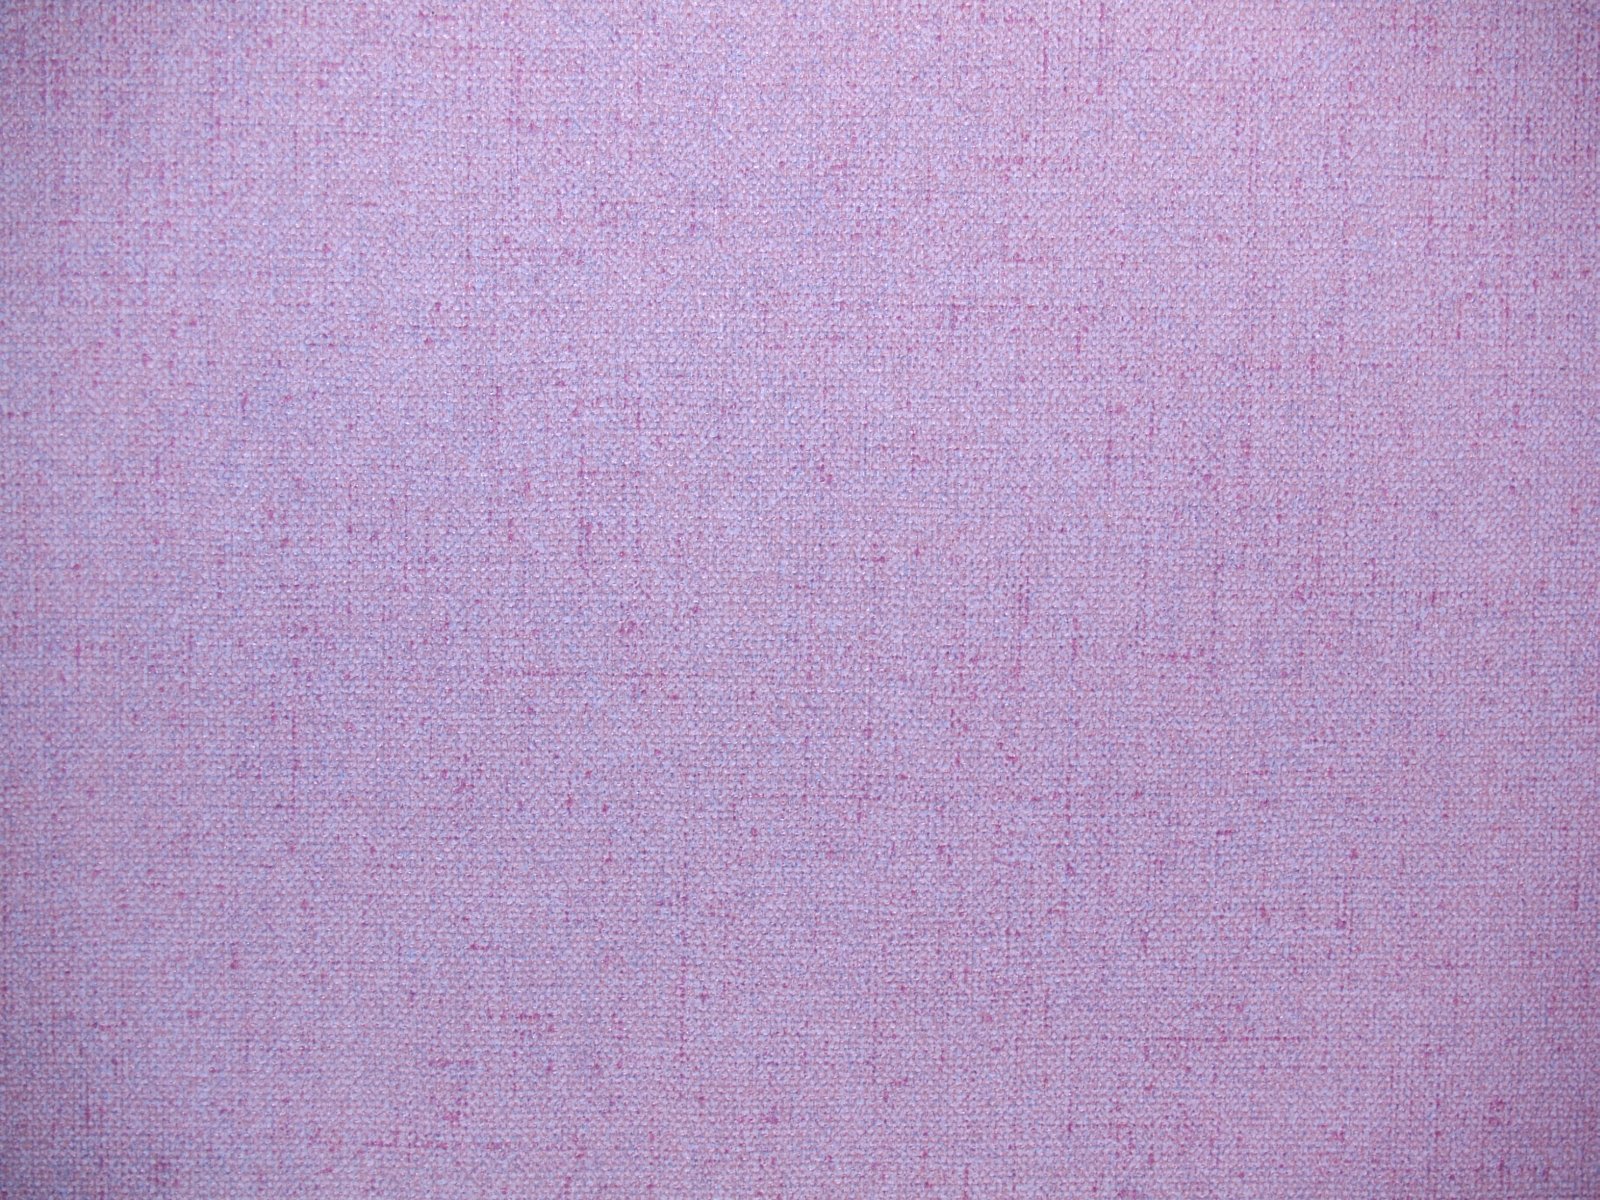 this is a pograph of a purple fabric